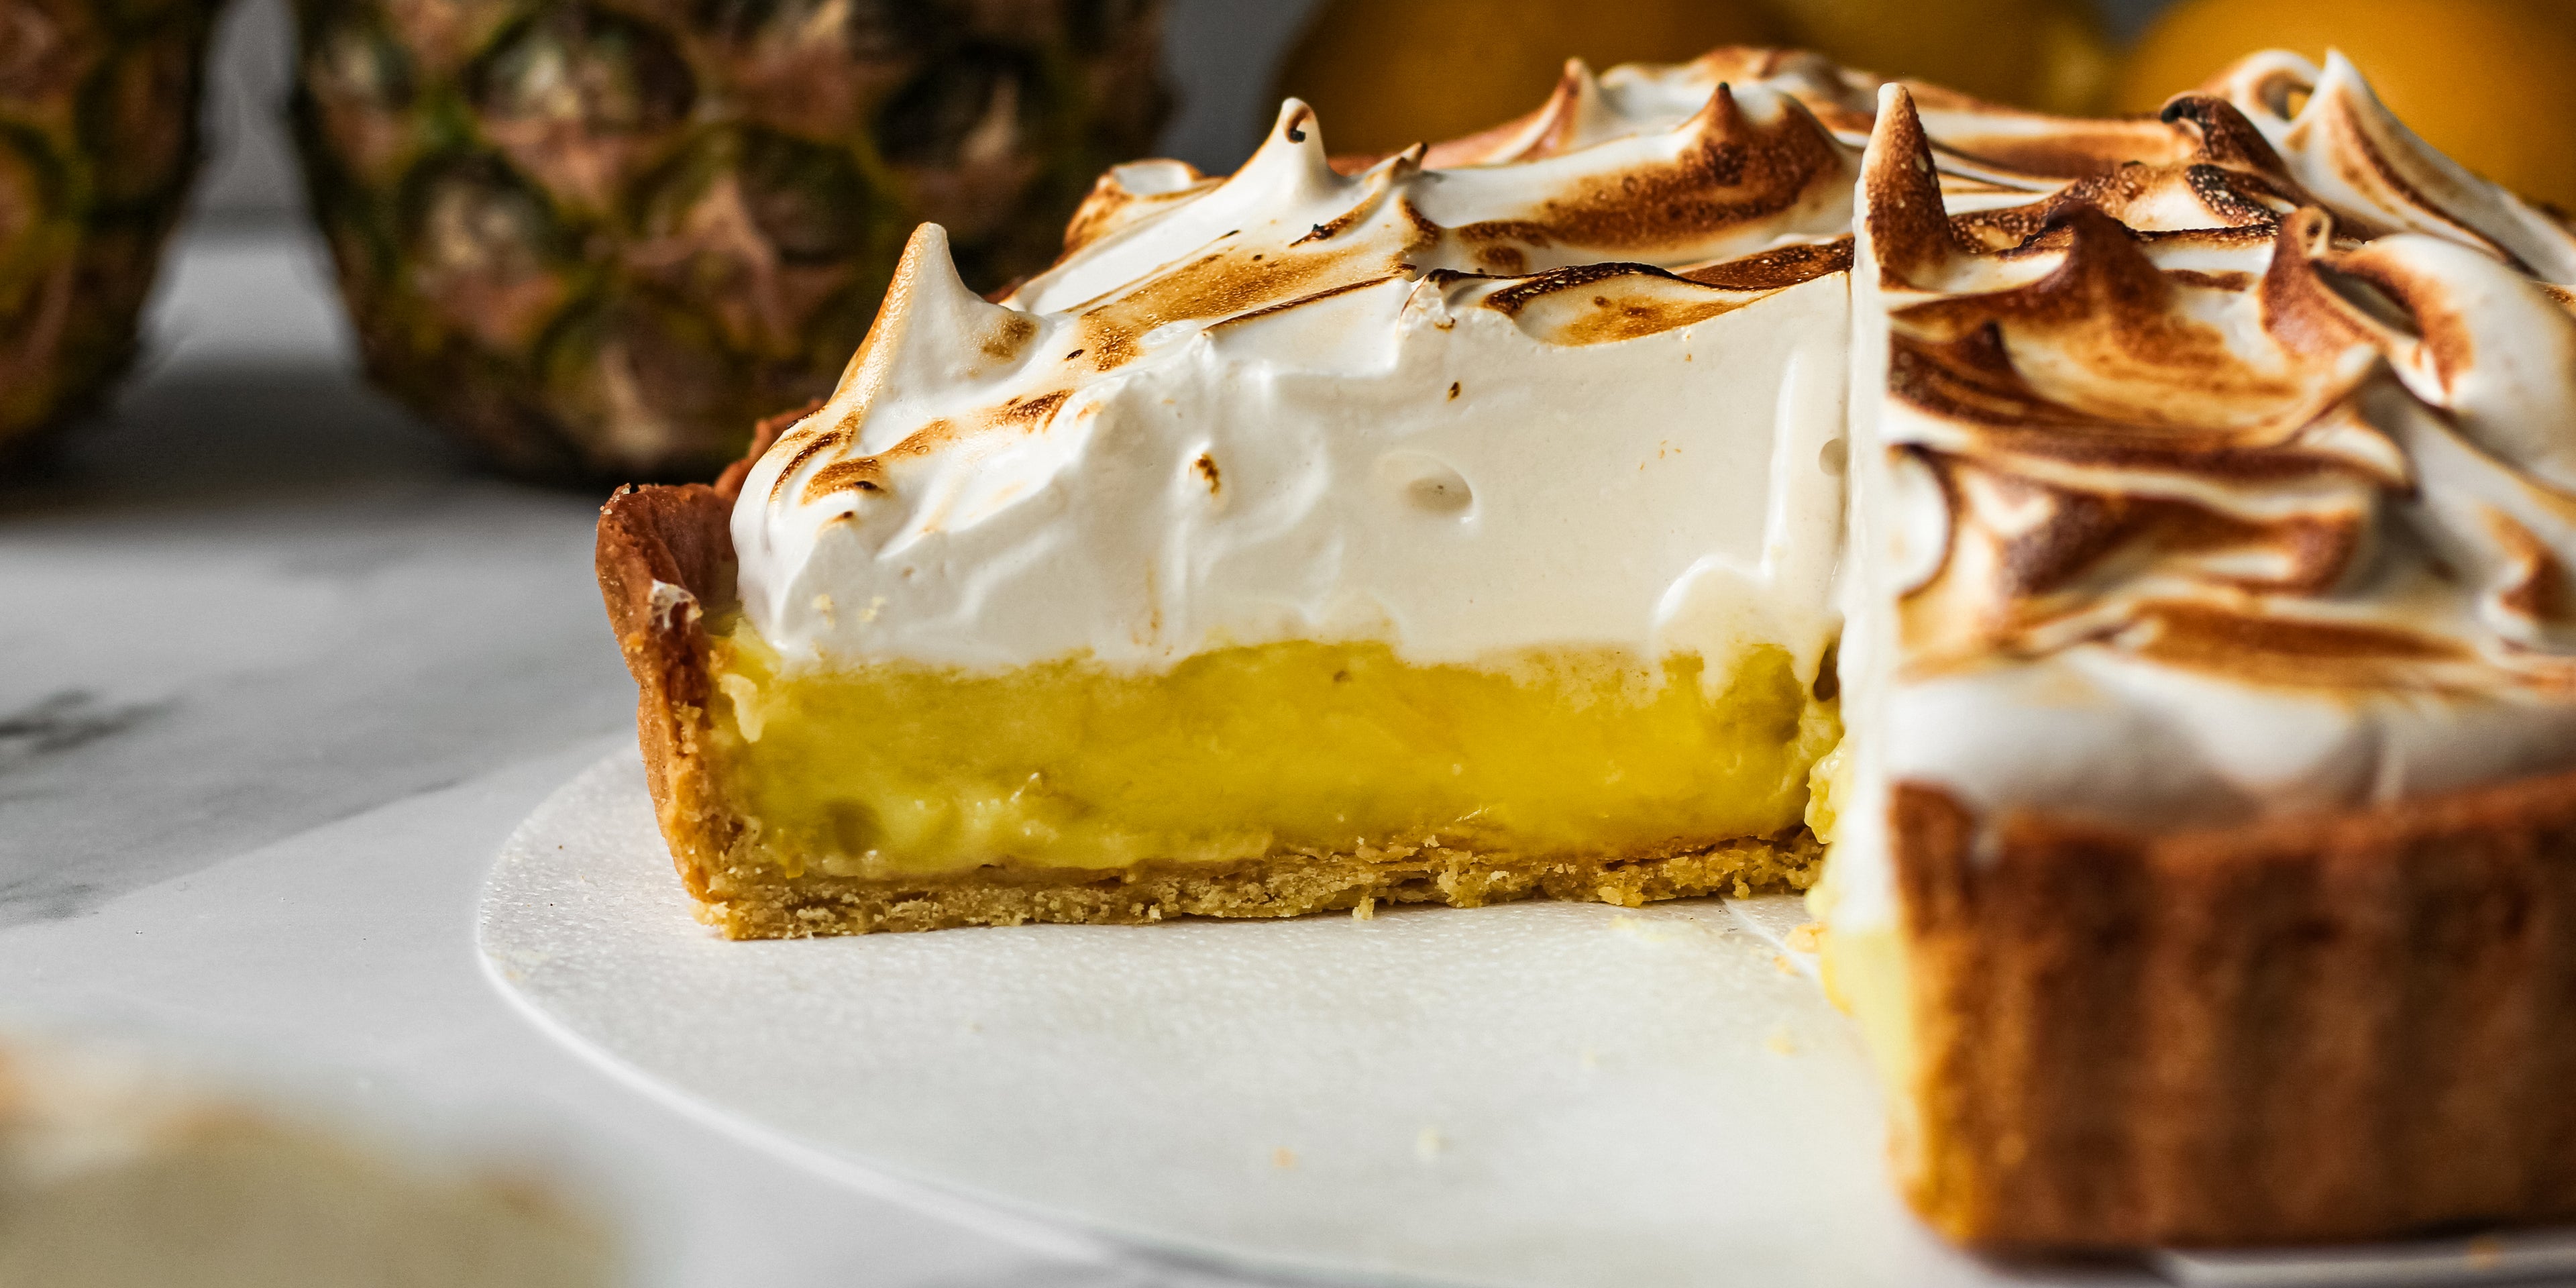 Close up of a sliced open Vegan Pineapple Meringue Pie showing the yellow pineapple layer, and thick meringue top